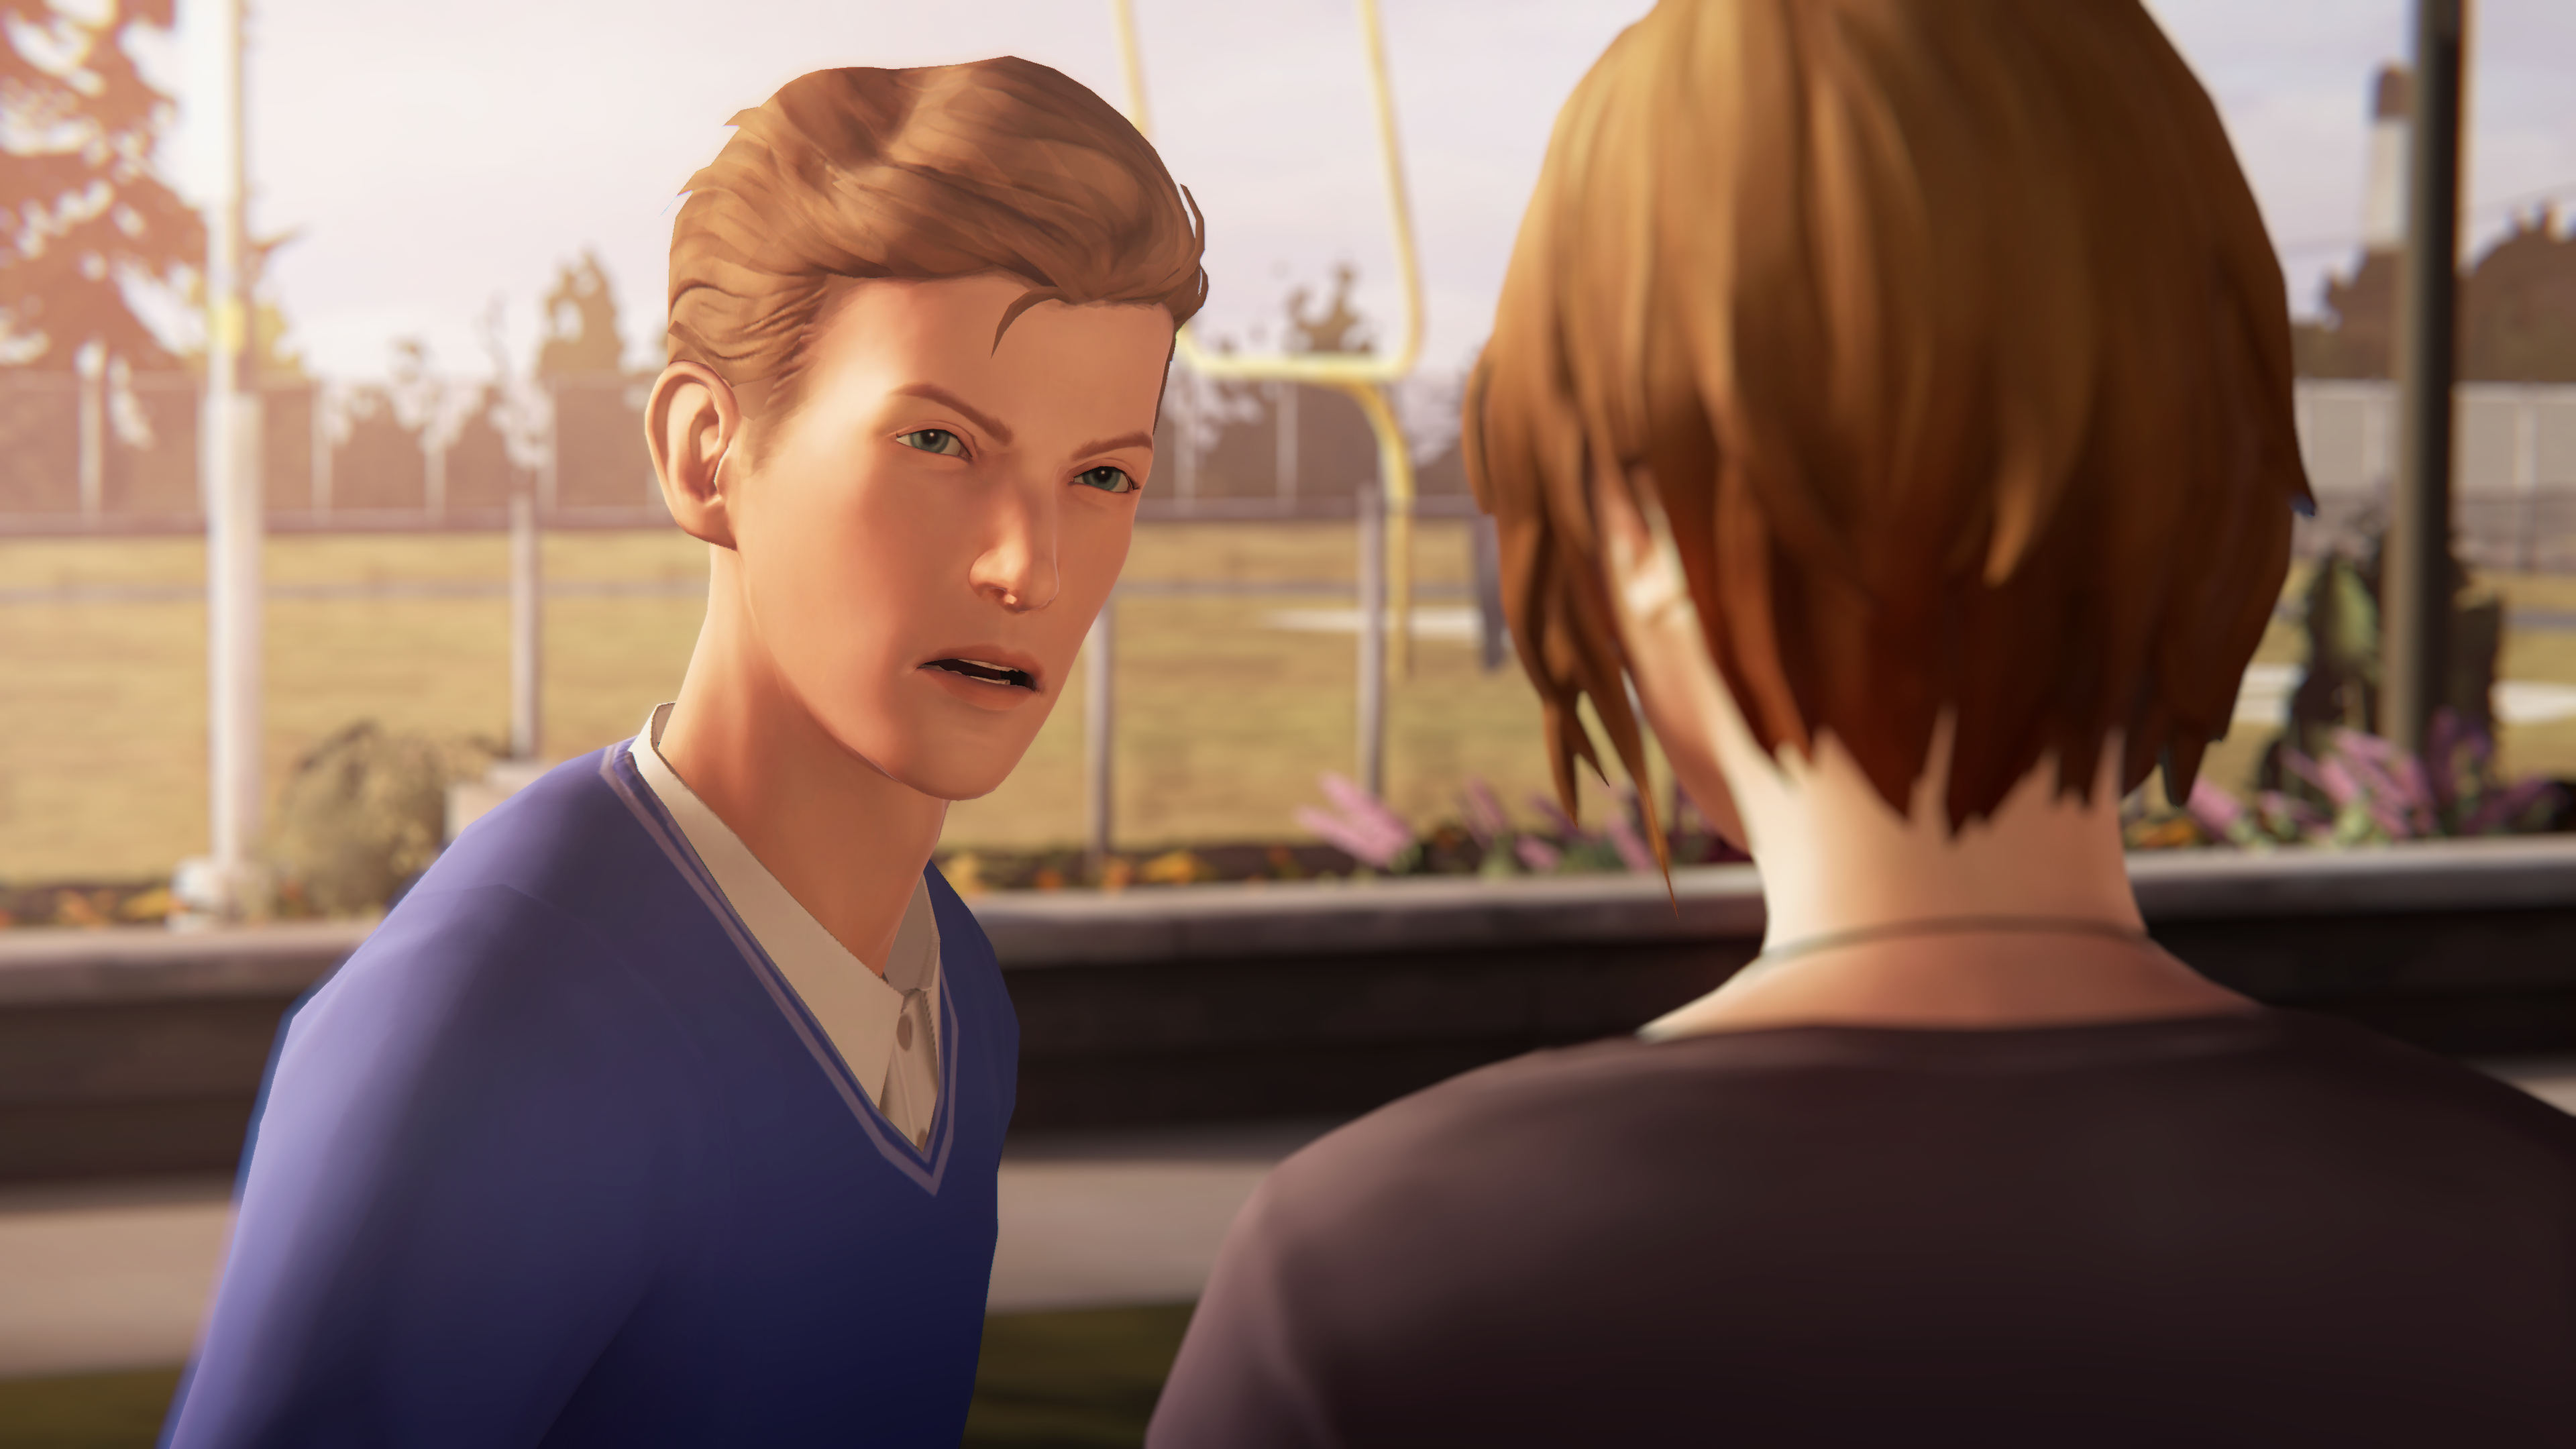 An angry Nathan Prescott, in a preppy blue sweater, confronts Chloe Price outside of Blackwell Academy.